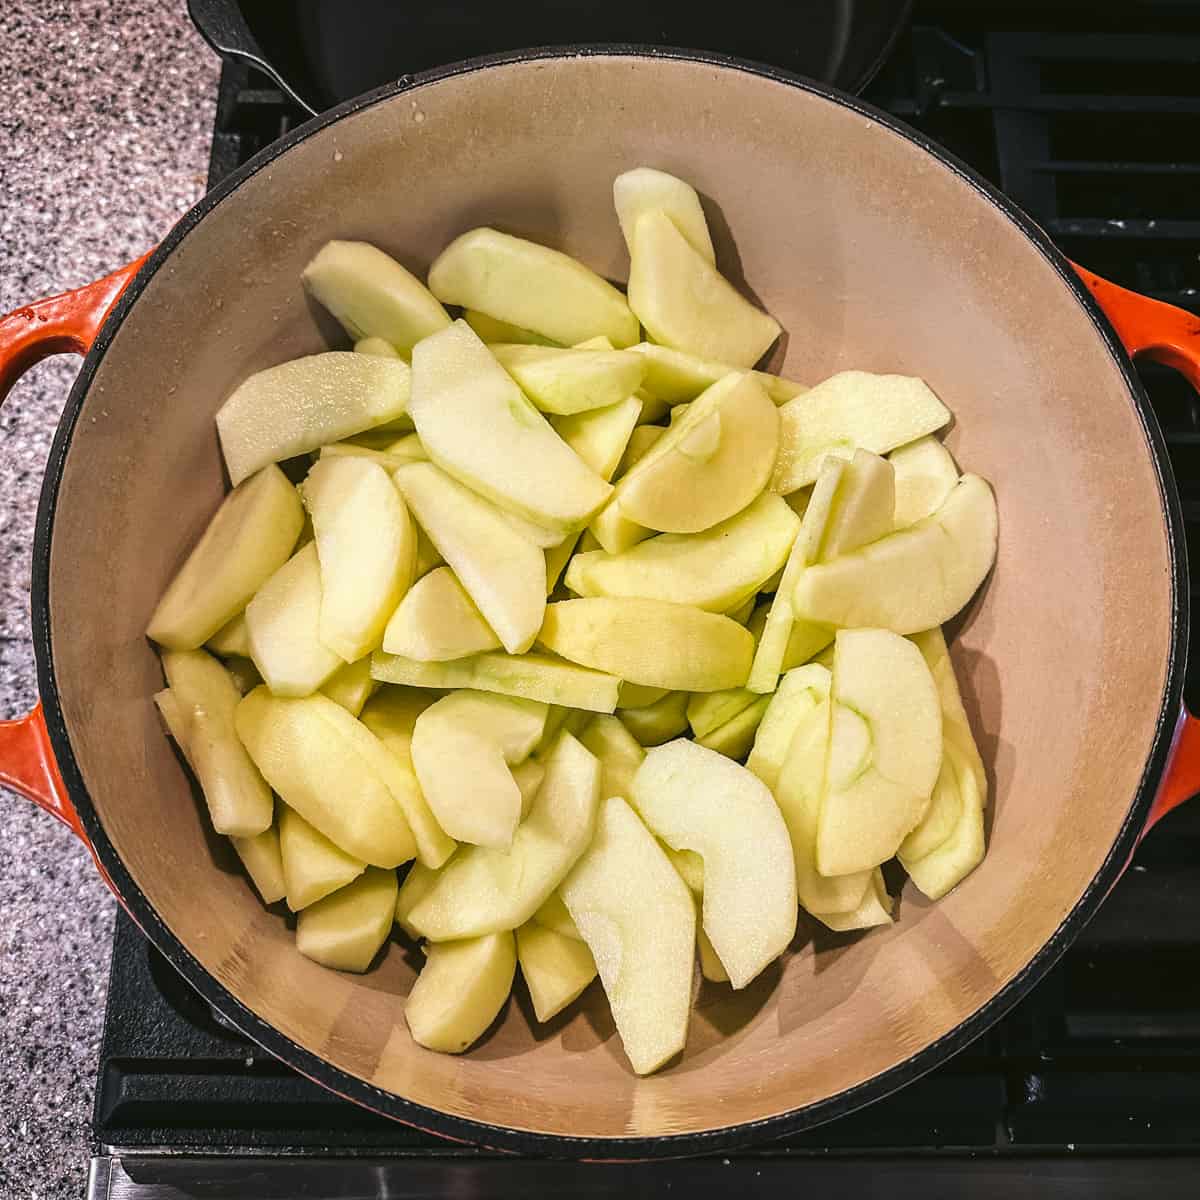 Sliced apples in a pot, top view.